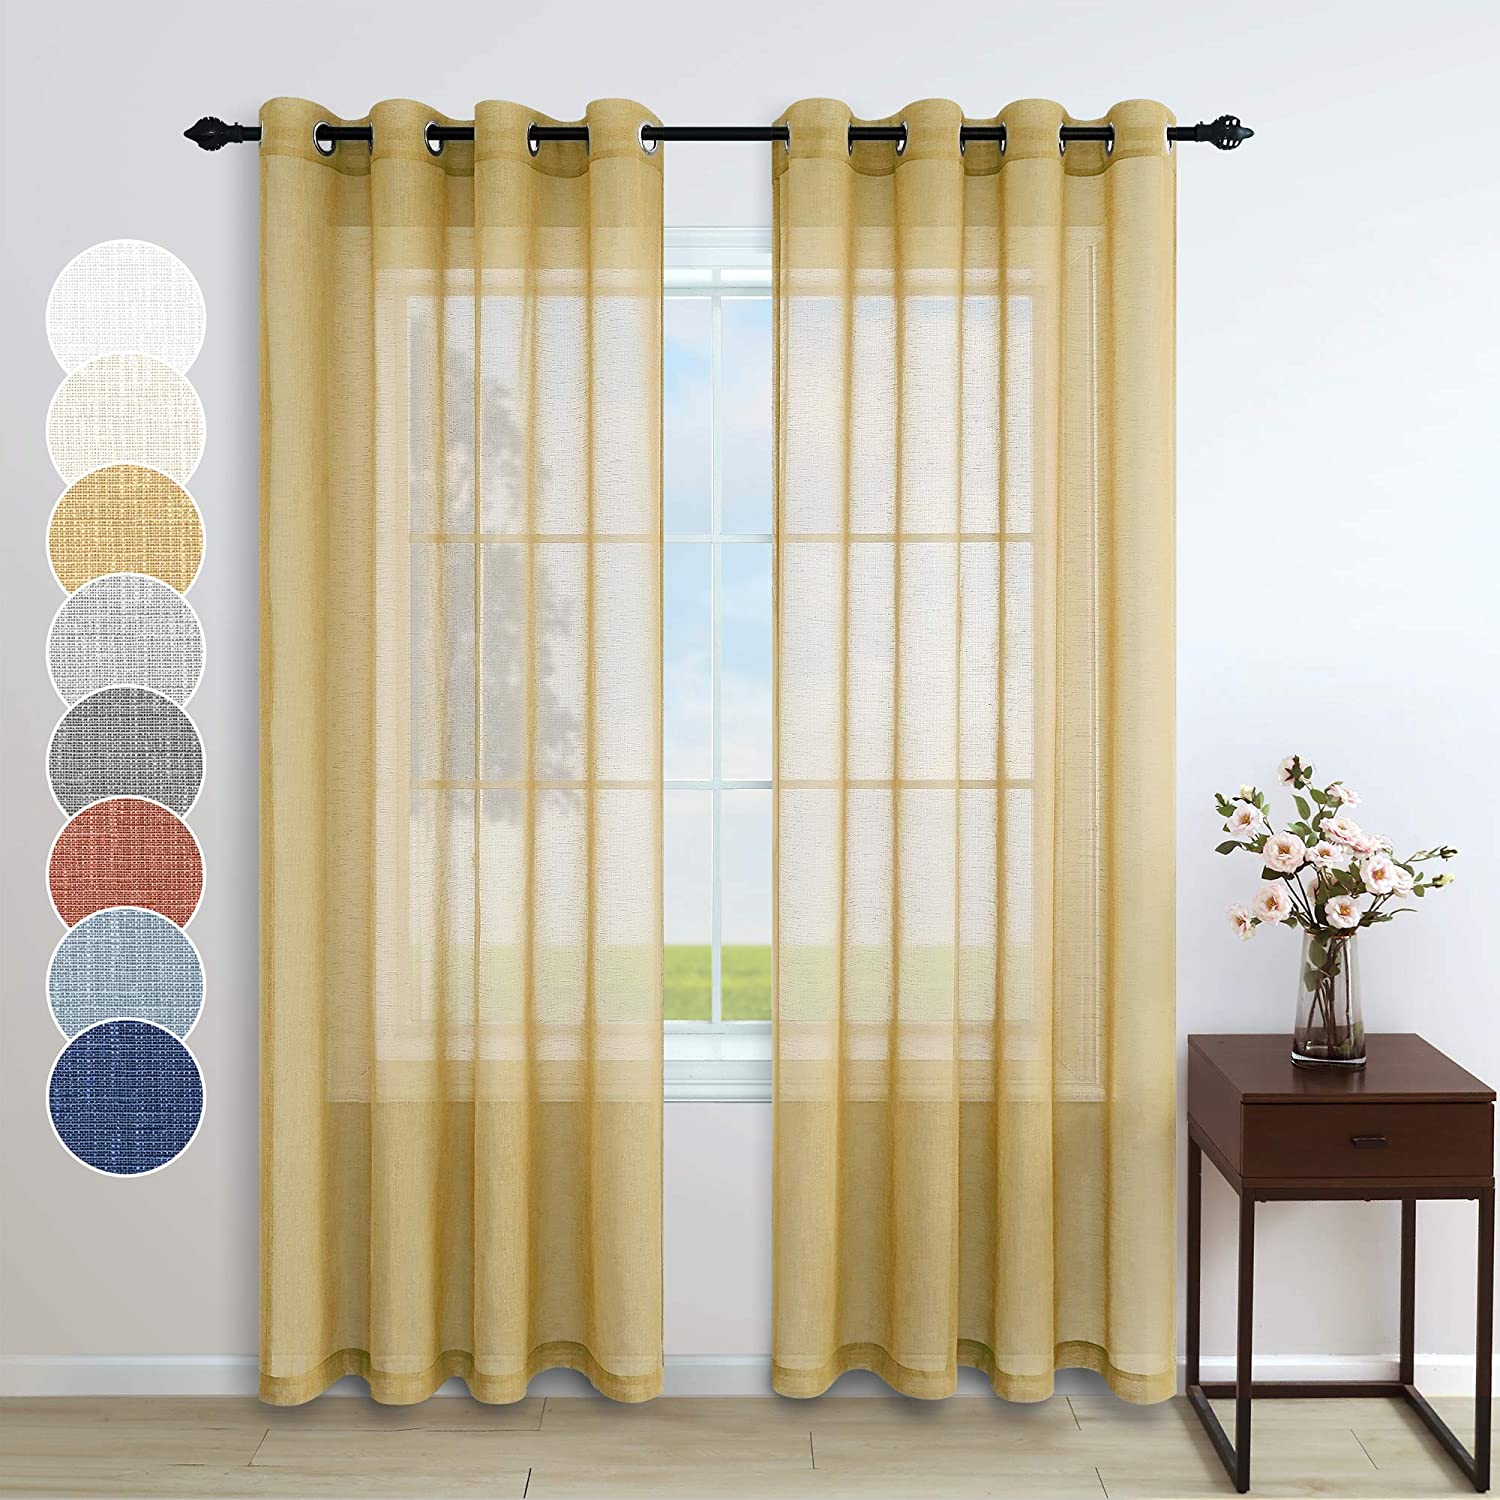 Pitalk Linen Weave Pattern Gold Sheer Curtains, 84-Inch